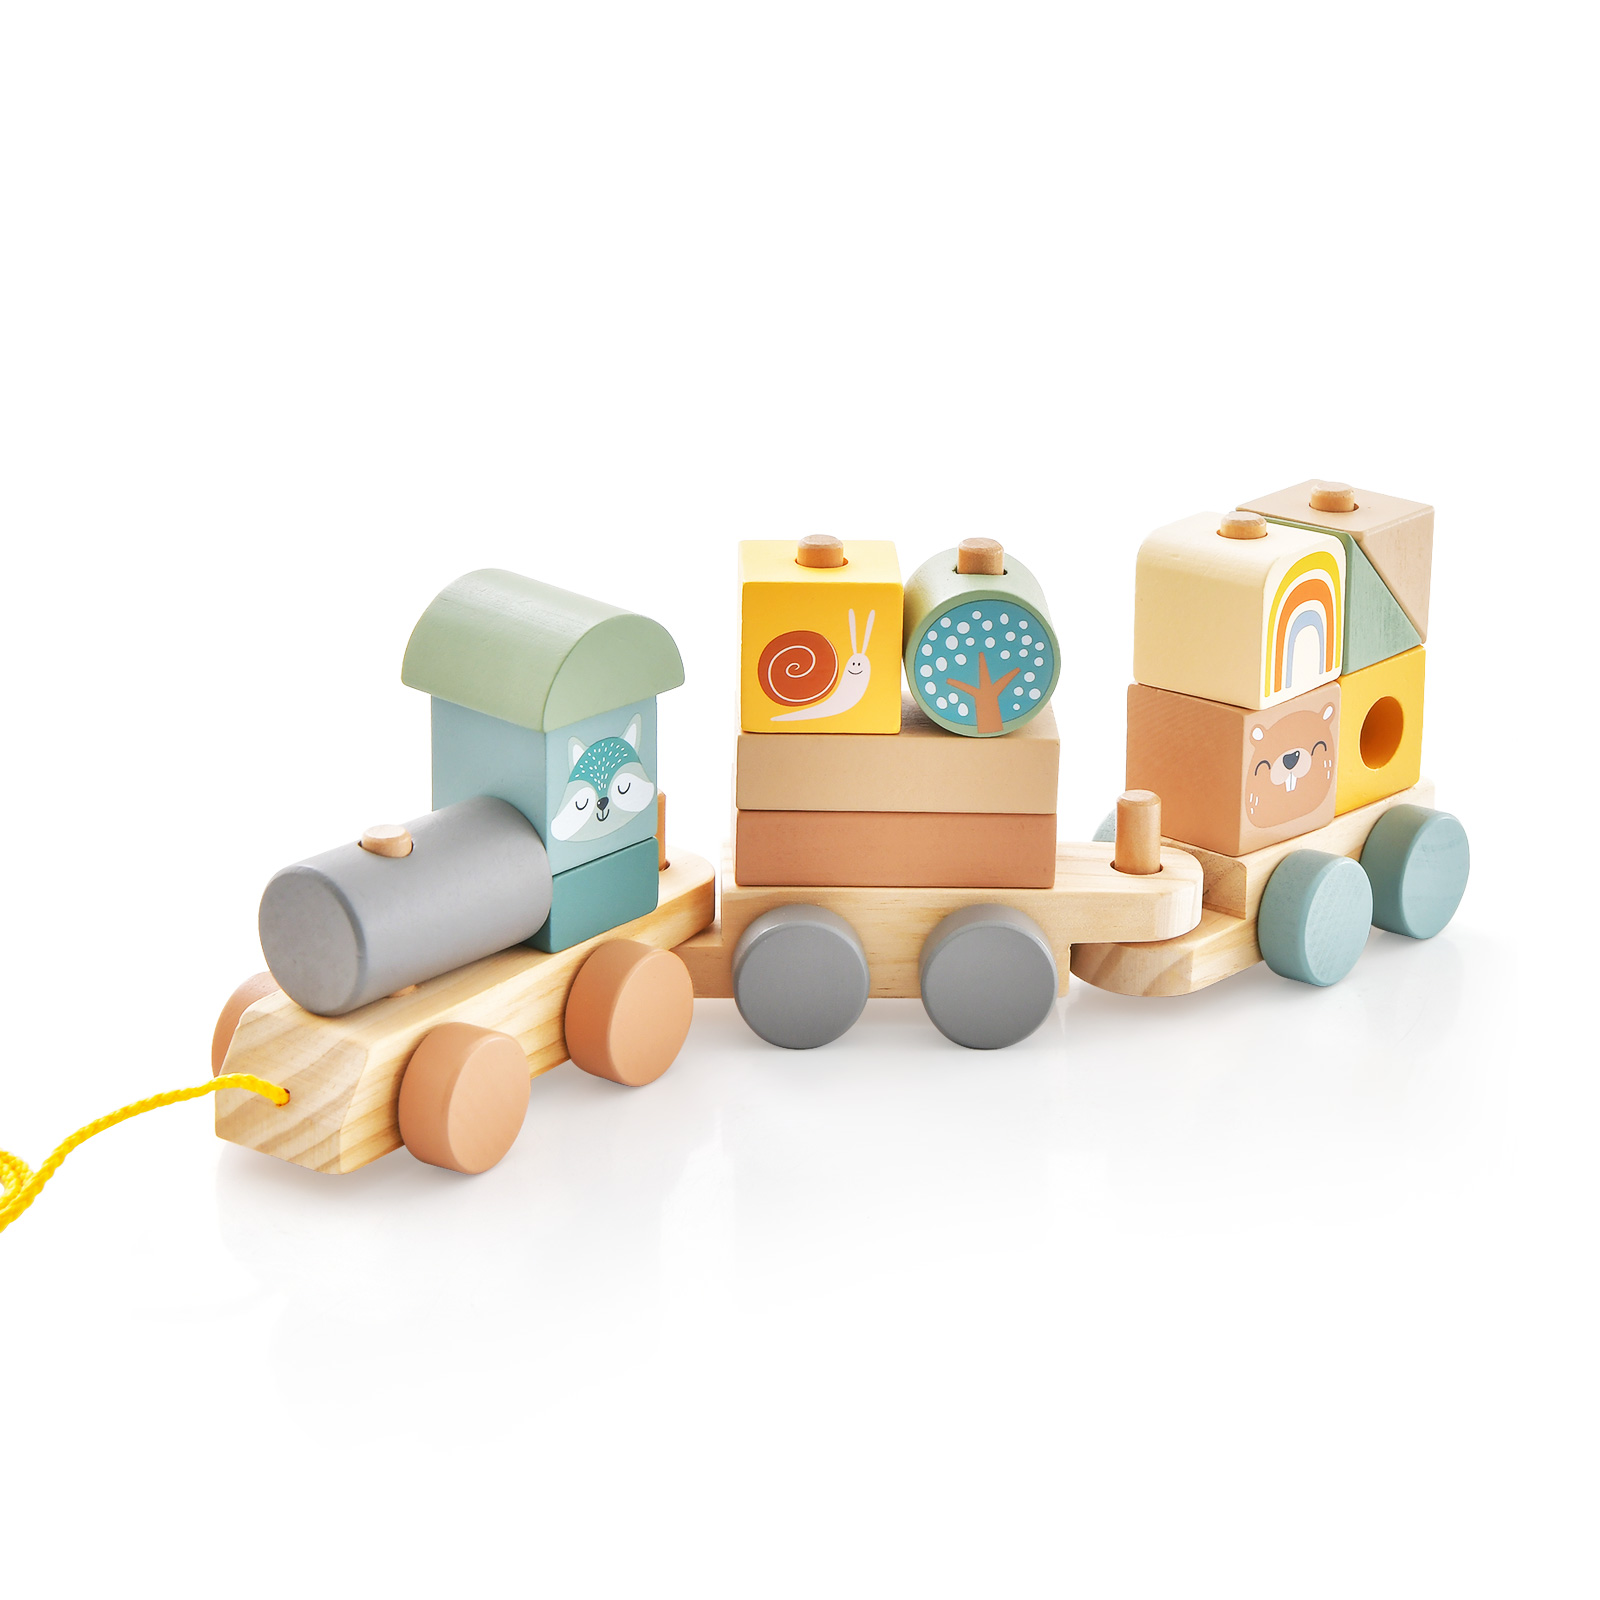 Wooden Toy Train Set with Stacking Wooden Blocks for Early Learning Education